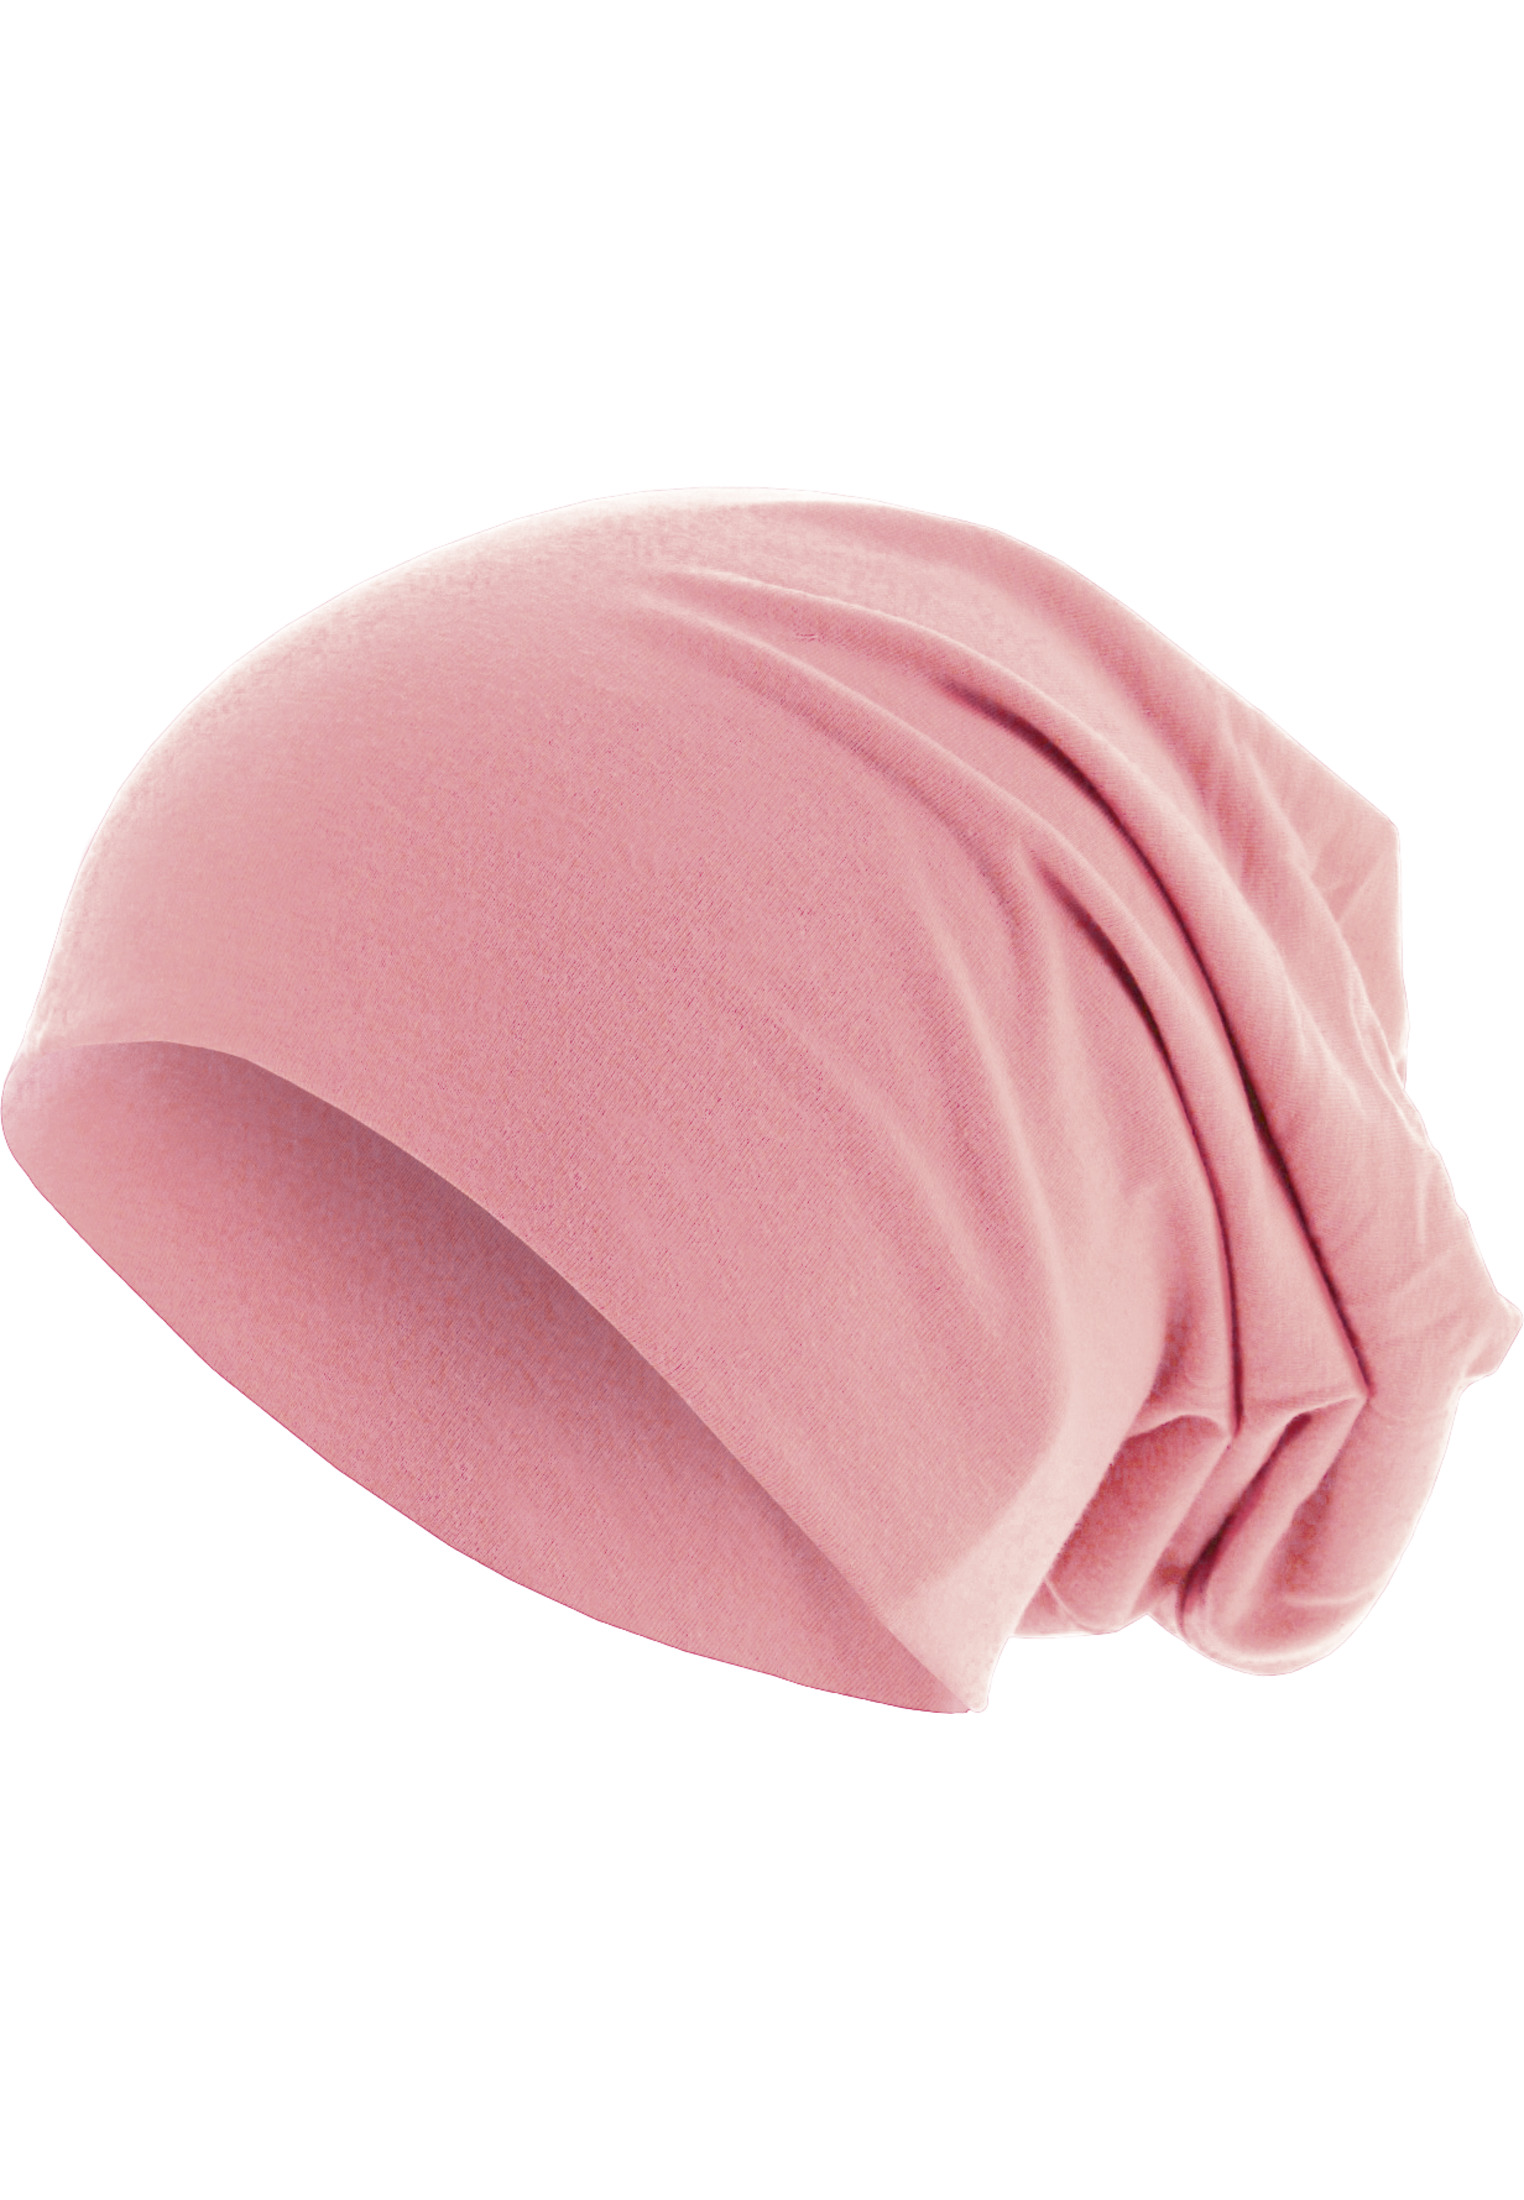 Caps & Beanies Pastel Jersey Beanie in Farbe light pink